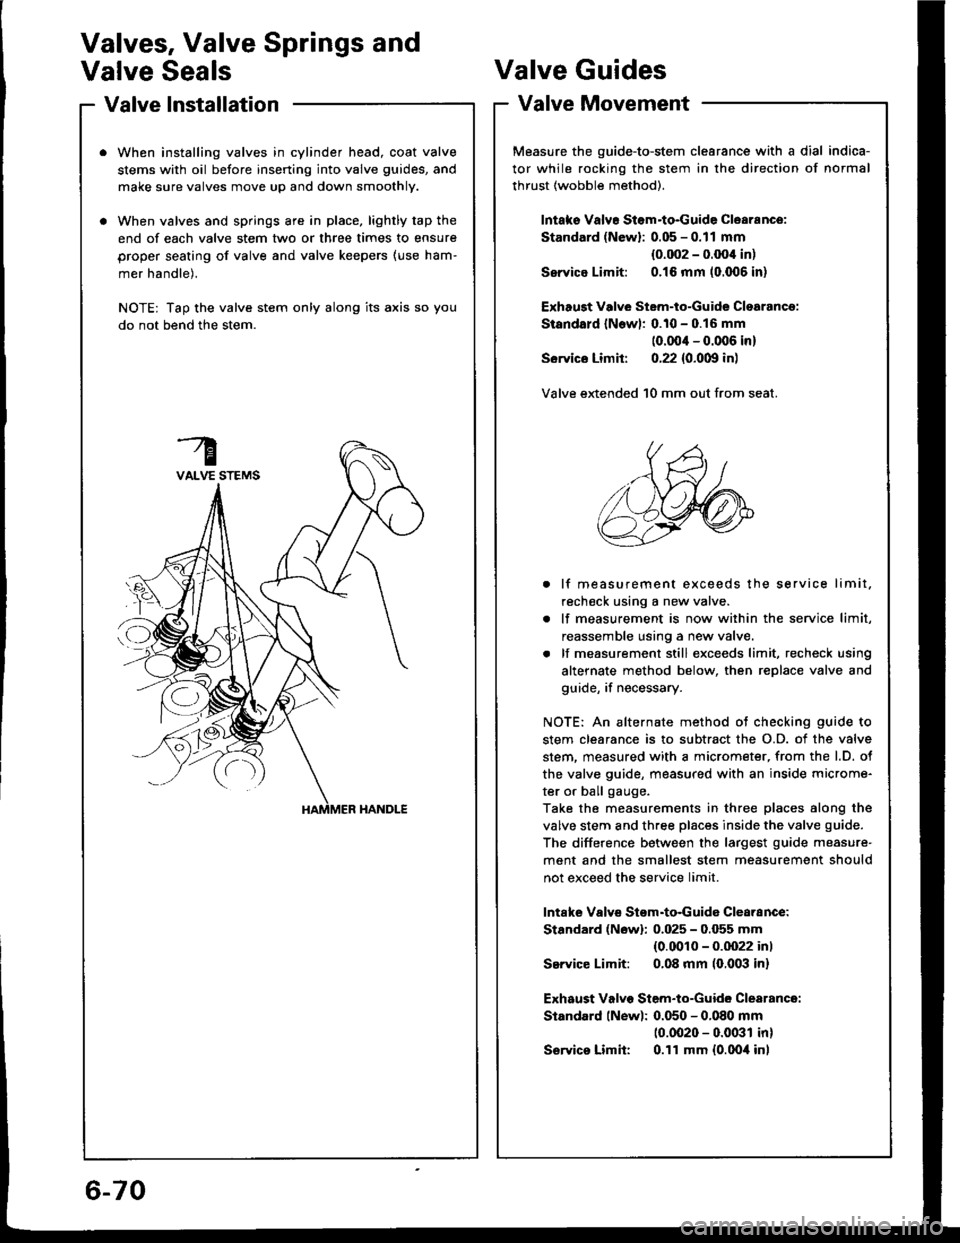 HONDA INTEGRA 1994 4.G Workshop Manual Valve lnstallation
When installing valves in cylinder head, coat valve
stems with oil before inserting into valve guides, and
make sure valves move up and down smoothly.
When valves and springs are in